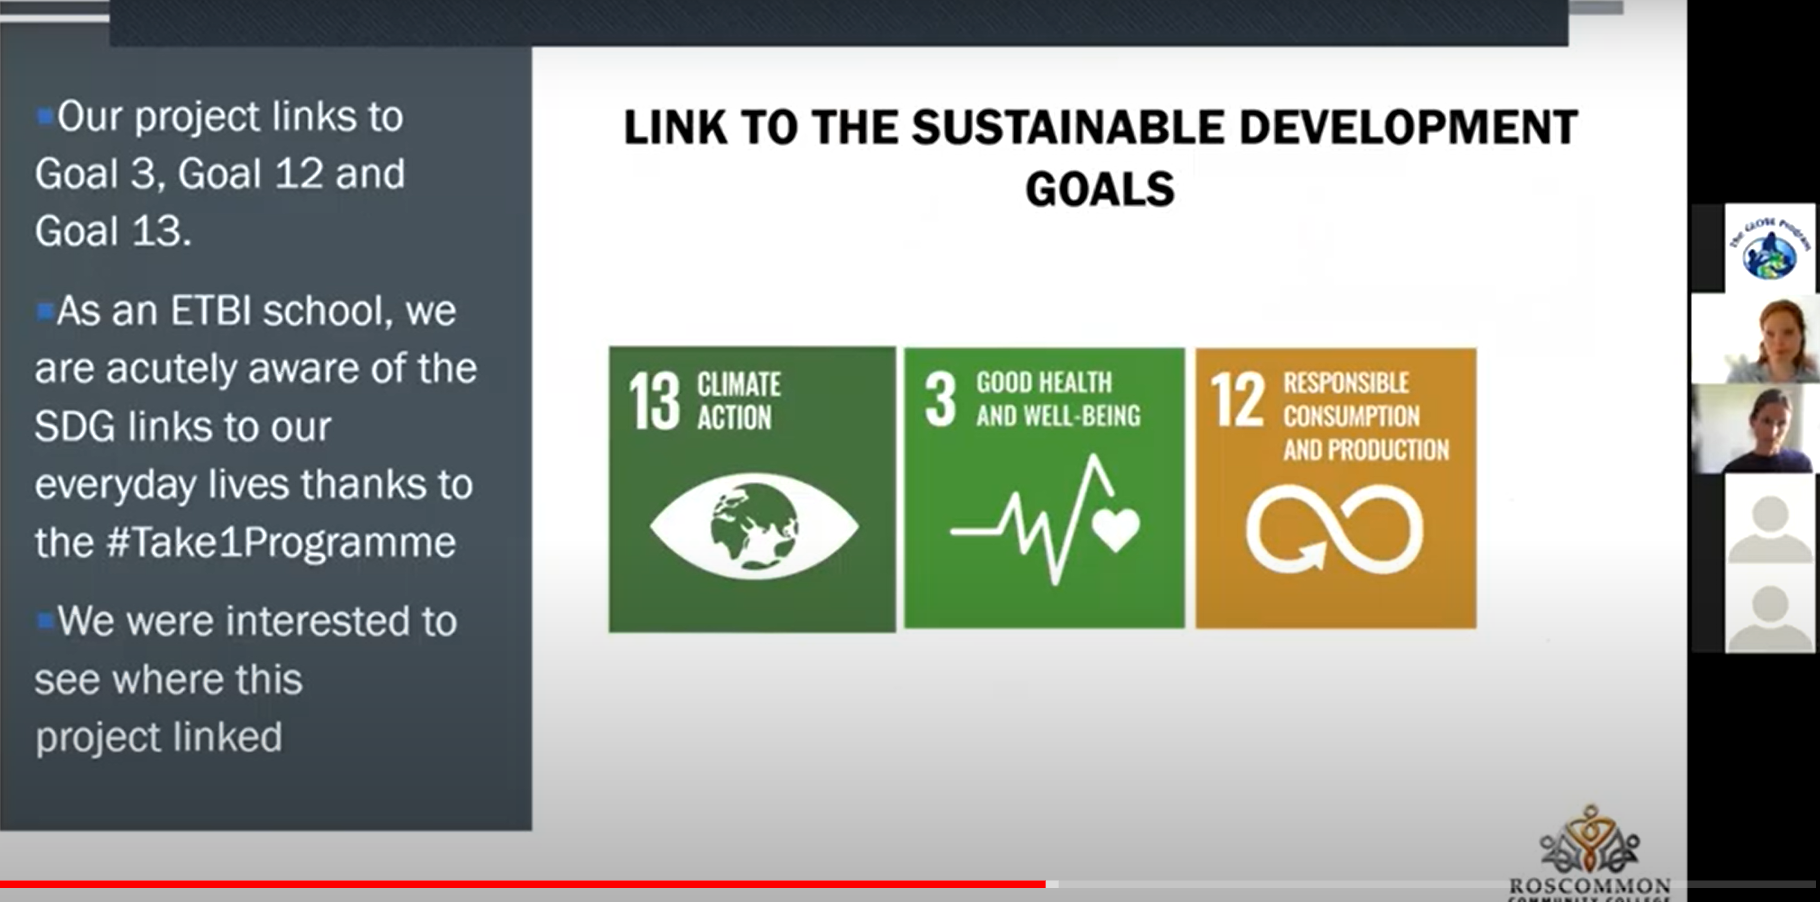 A screen shot of the Zoom meeting from the 10 May 2022 GLOBE Ireland Air Quality Campaign "End-of-Year" Event highlighting the campaigns connection to the UN's Sustainable Development Goals